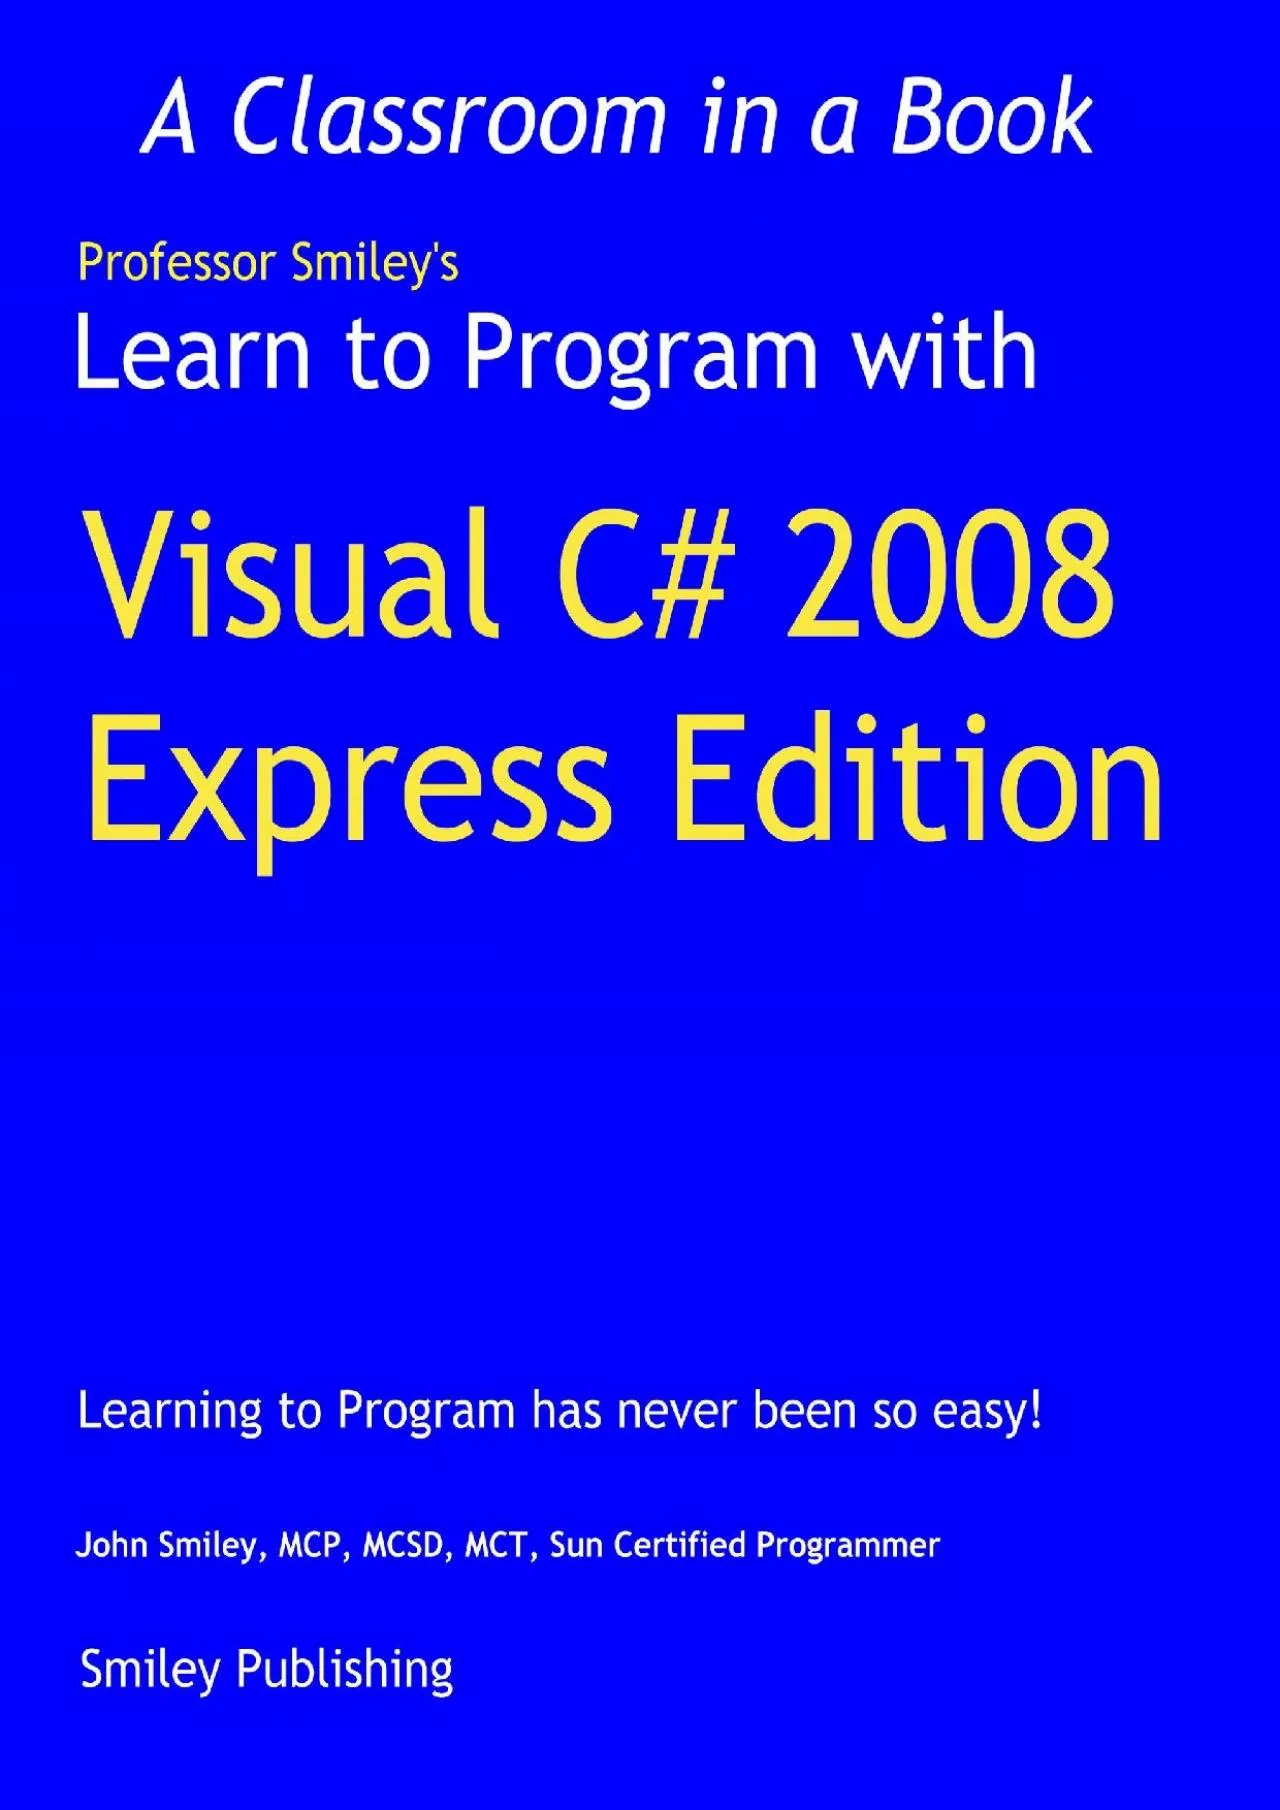 [PDF]-Learn to Program with Visual C 2008 Express (Professor Smiley teaches Computer Programming,